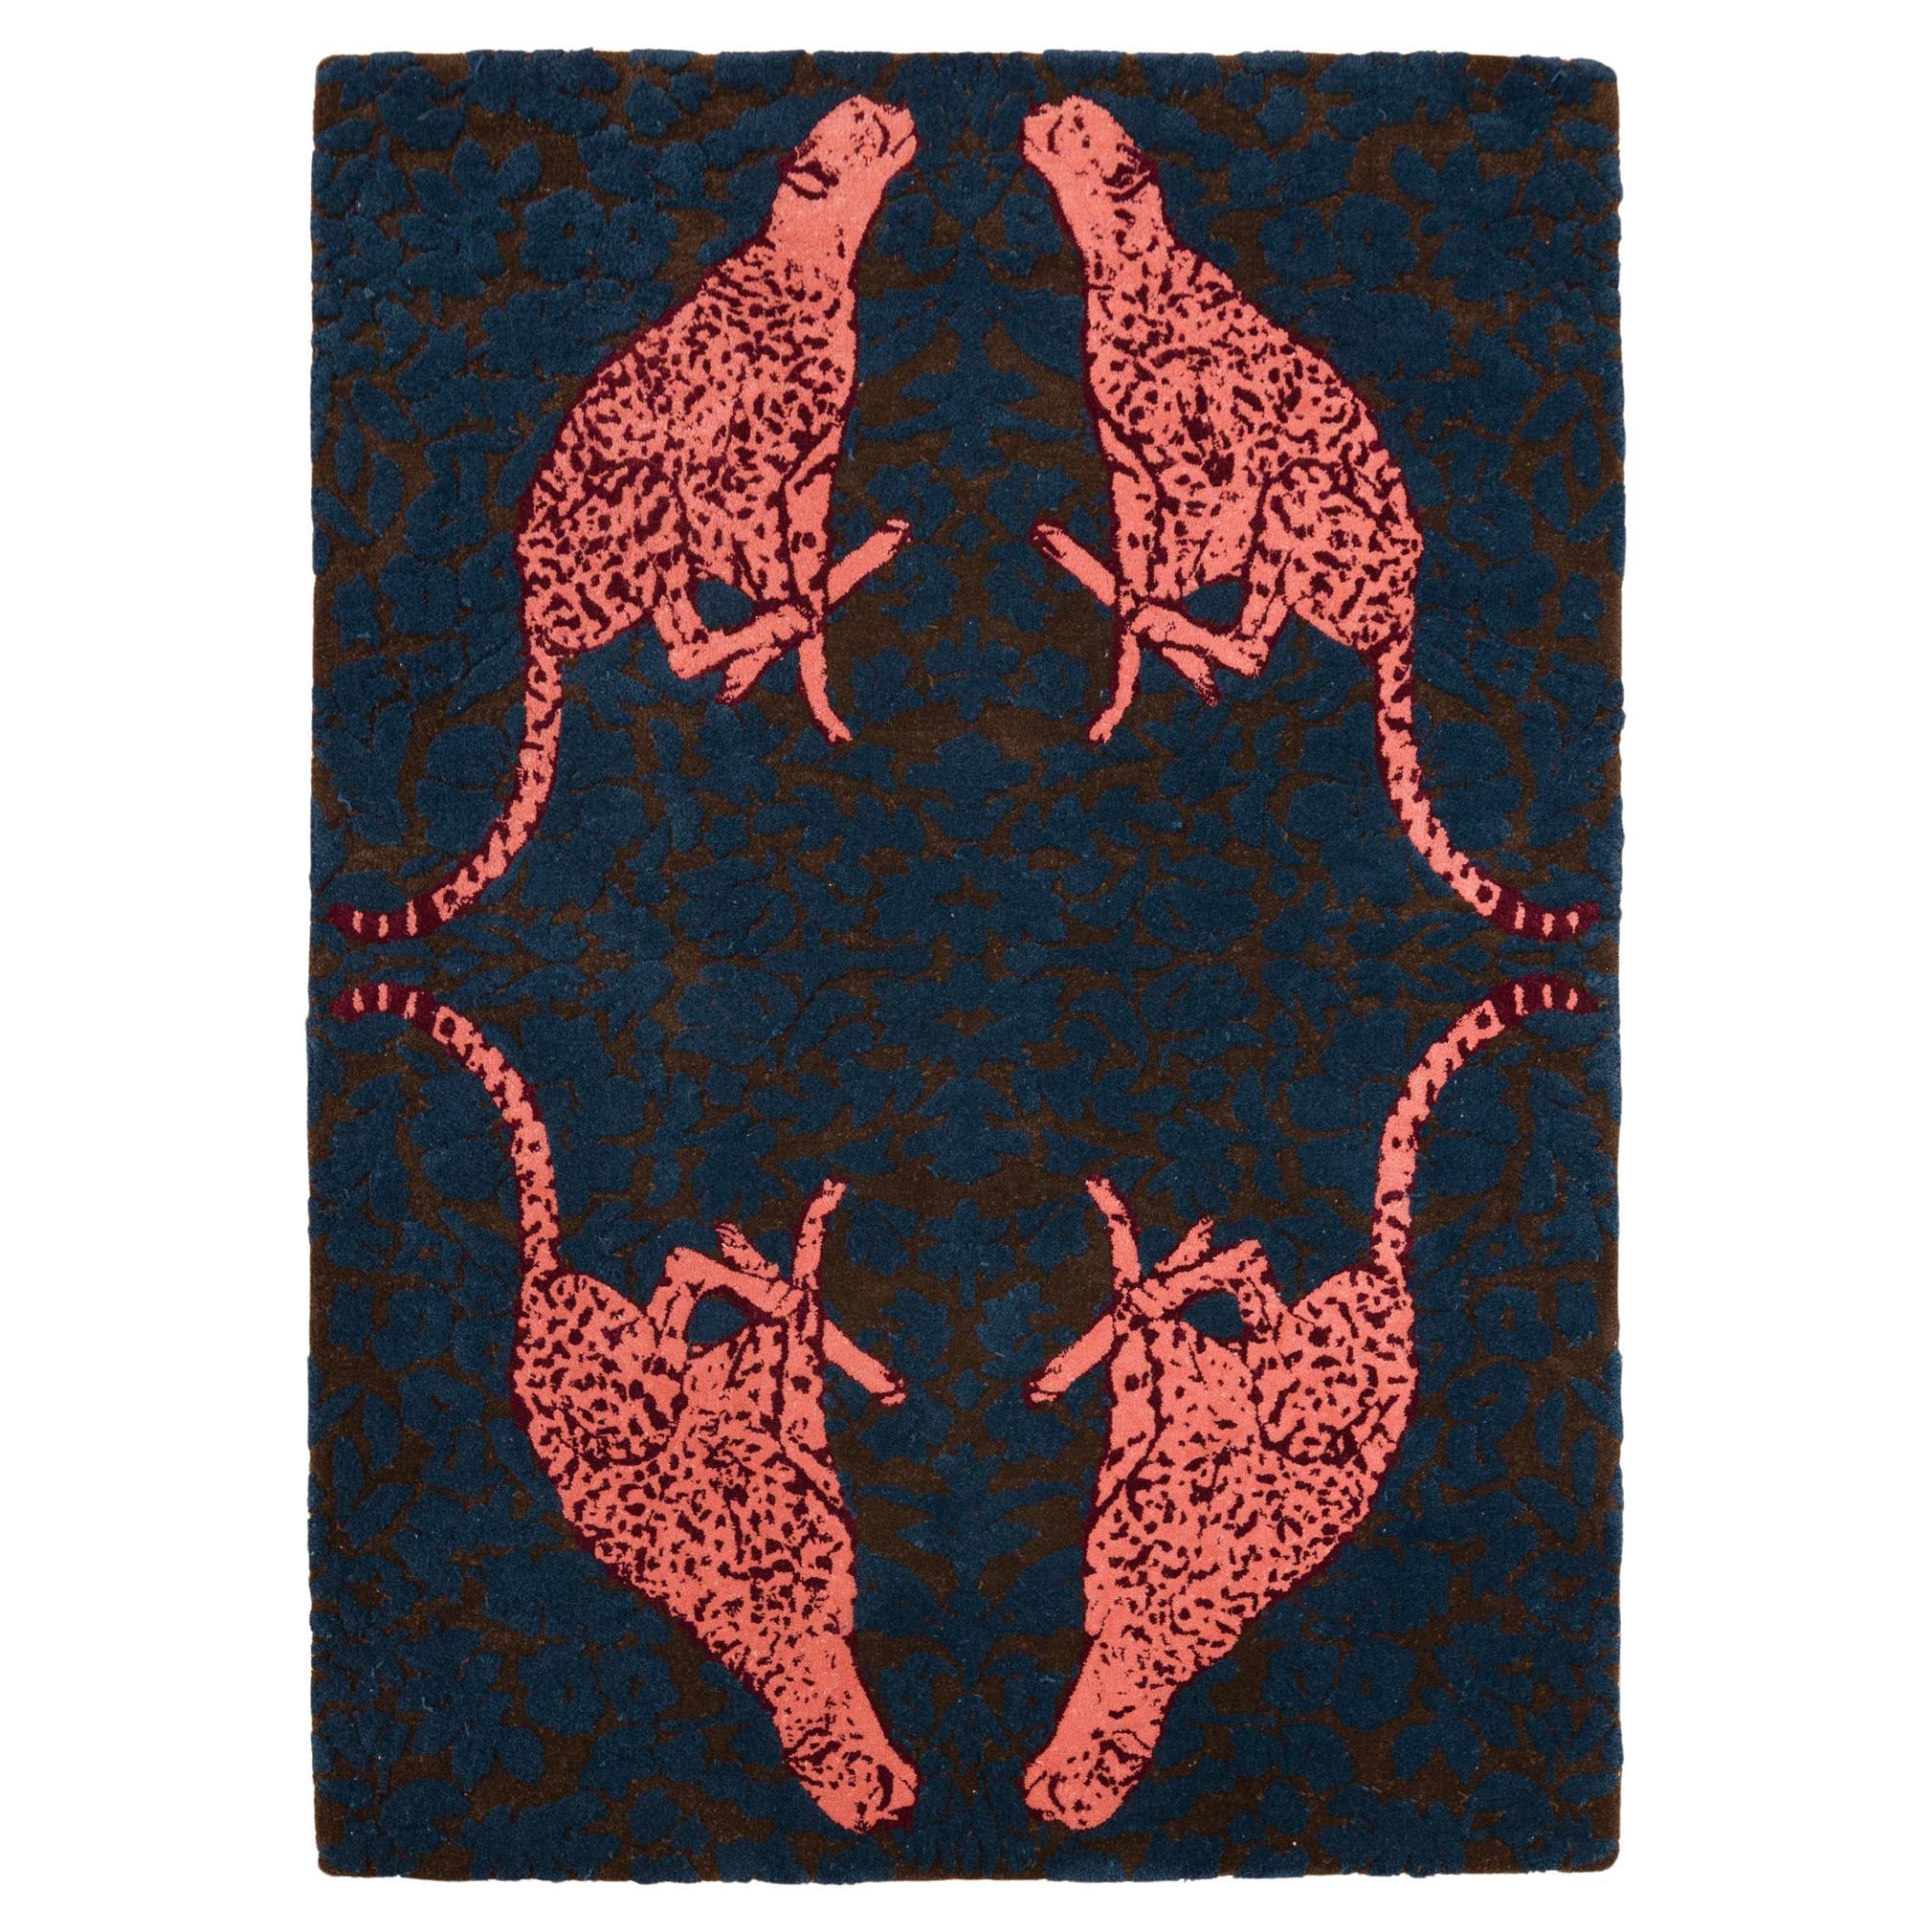 Cheetah Tufted Rug, "The Four Winds" Artist and Workshop collaboration